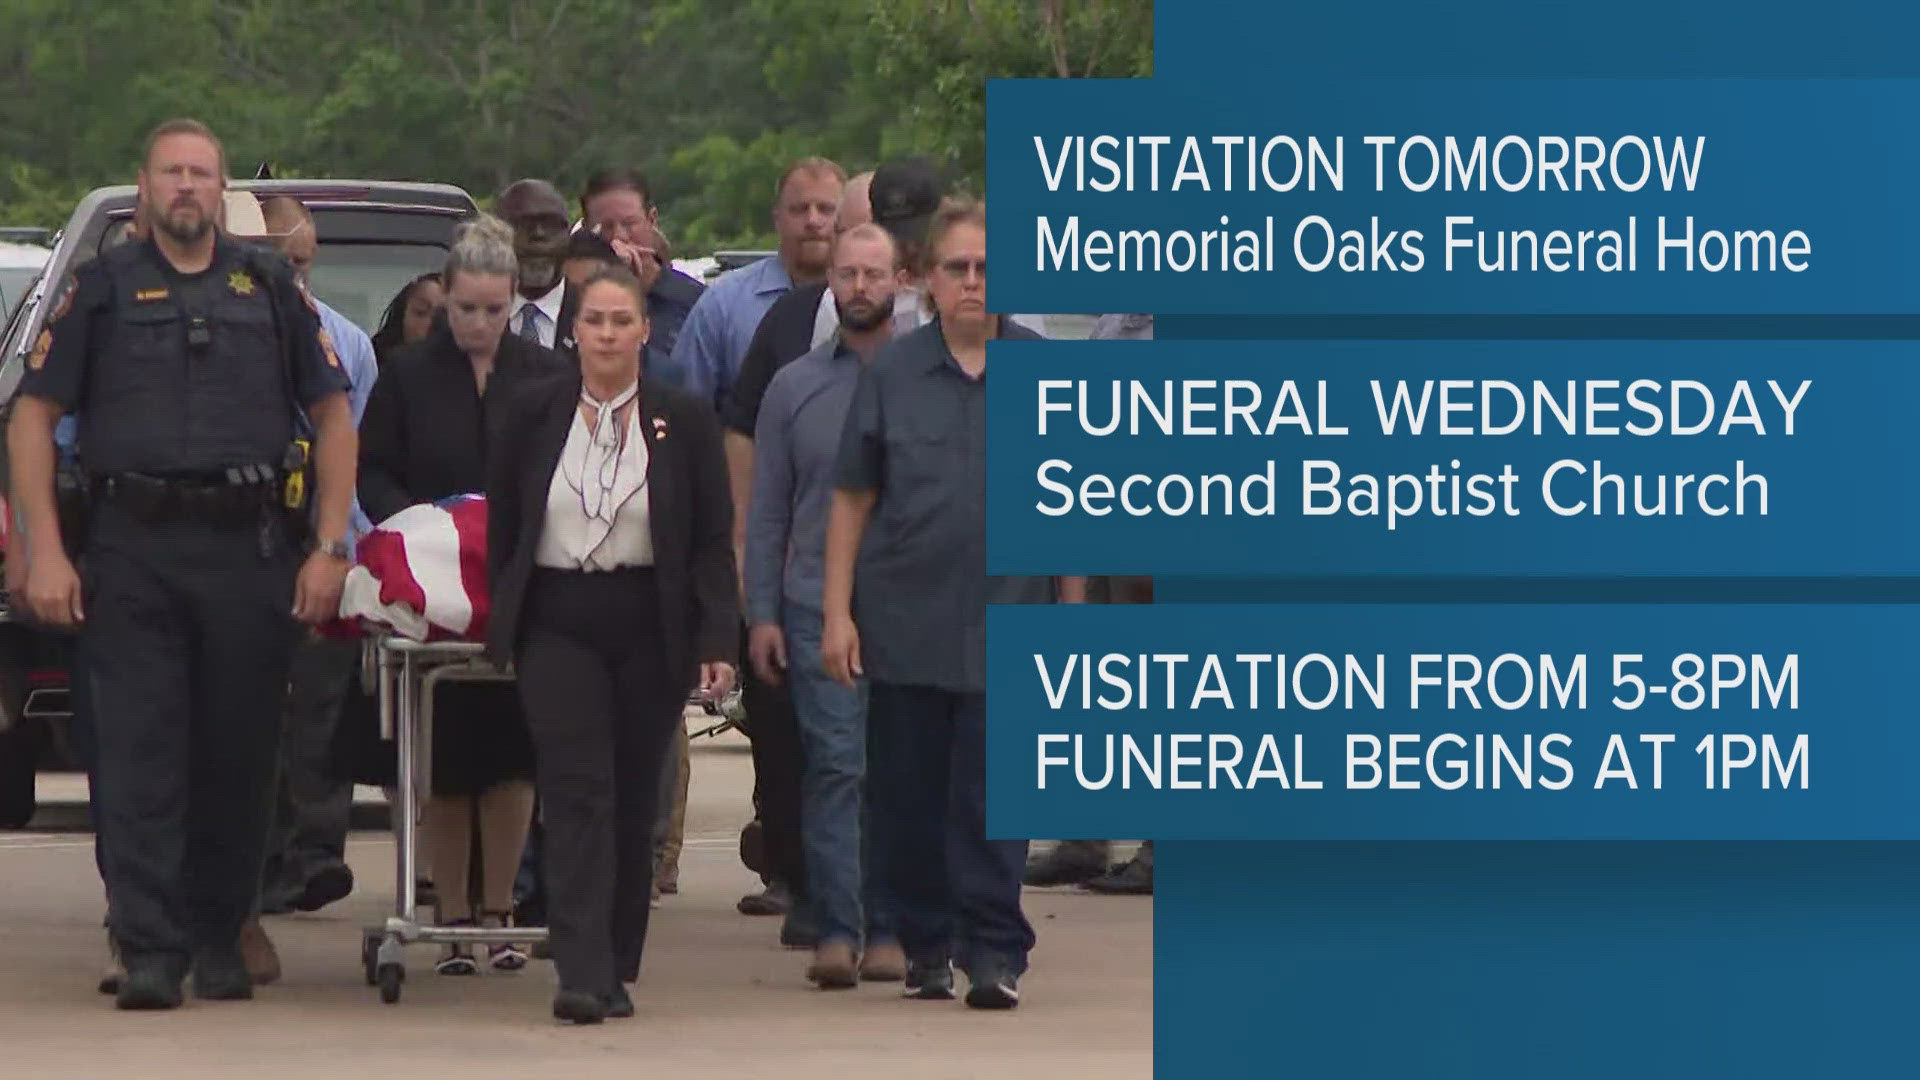 A funeral will take place Wednesday at Second Baptist Church.